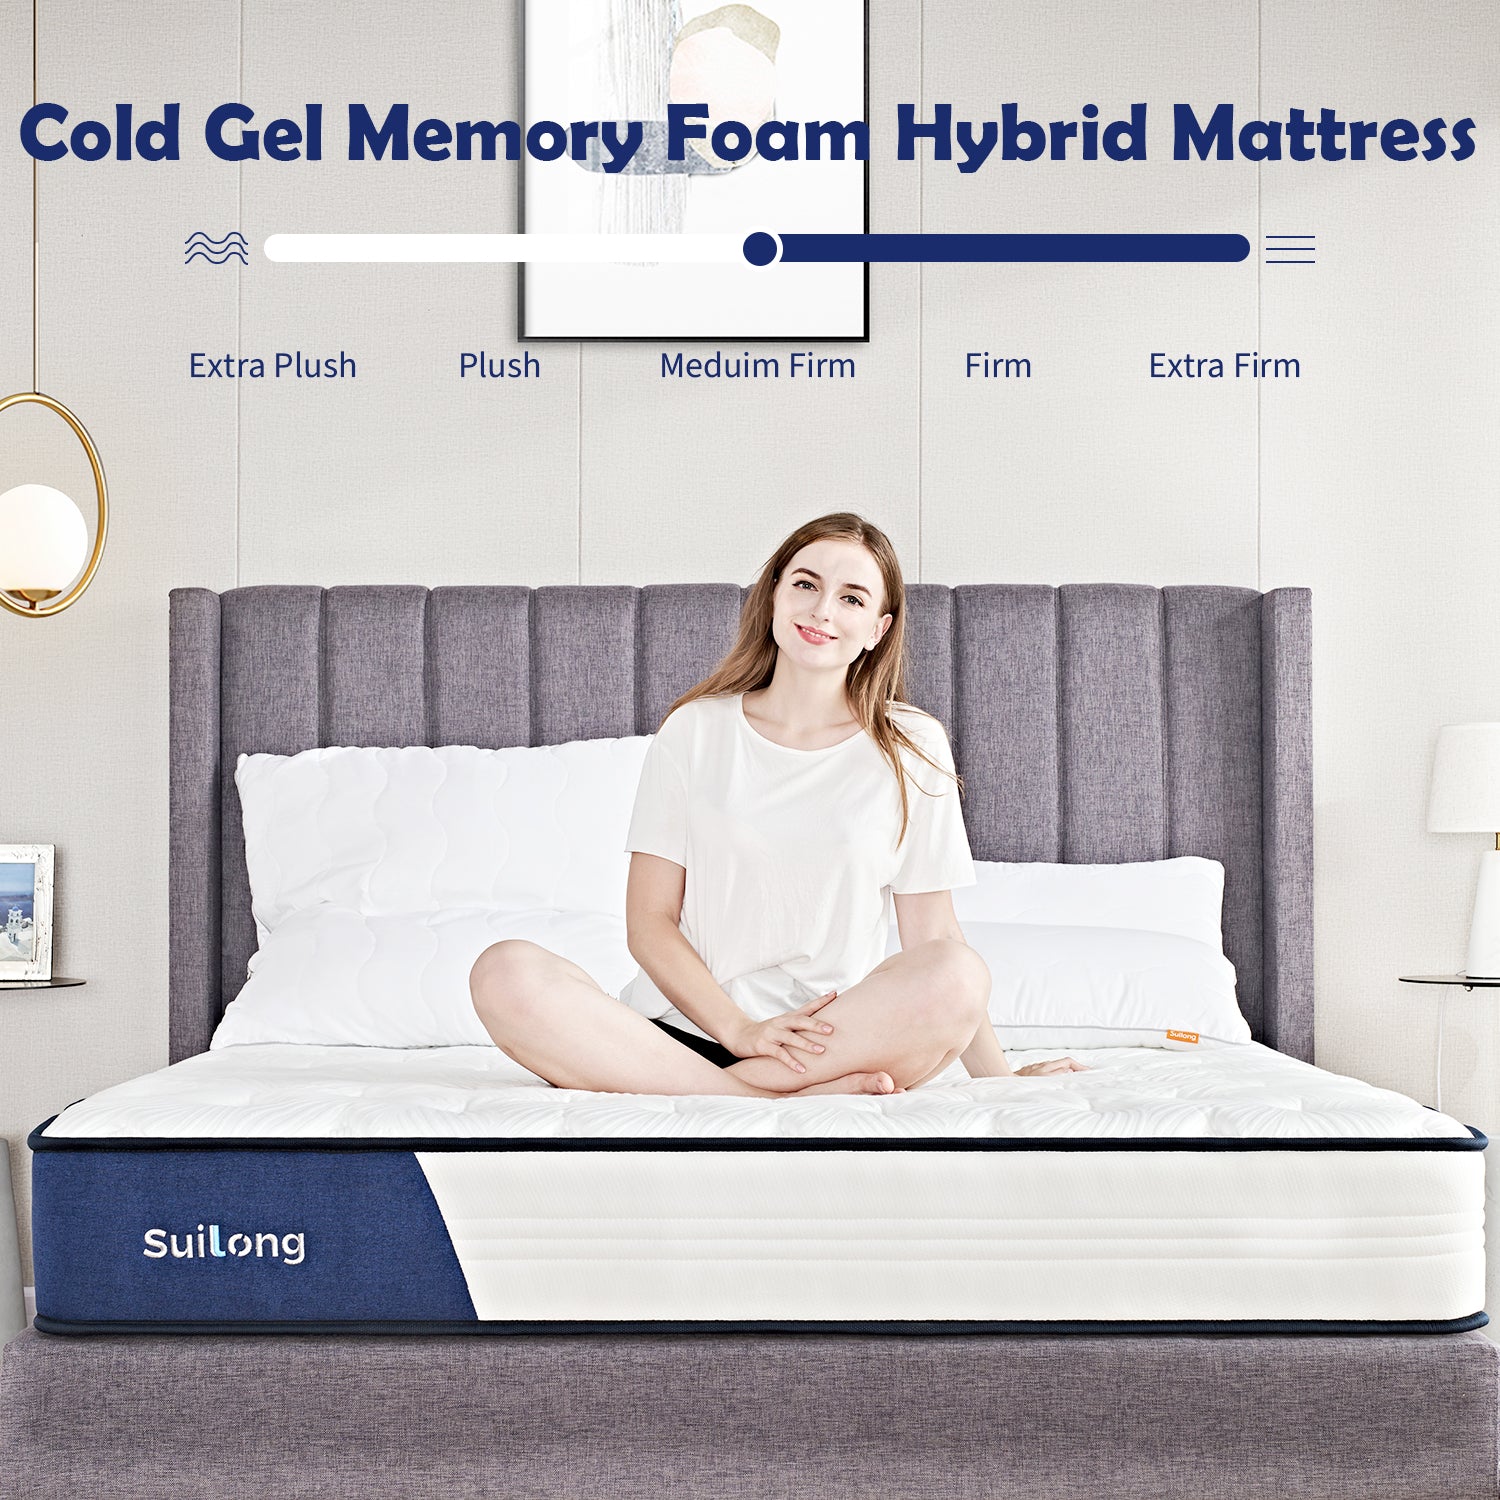 Suilong Sunrise 25cm Hybrid Mattress With Memory Foam And Innerspring For Pressure Relieving & Sleep Cooler - Enjoy a Better Night's Sleep with a SuiLong